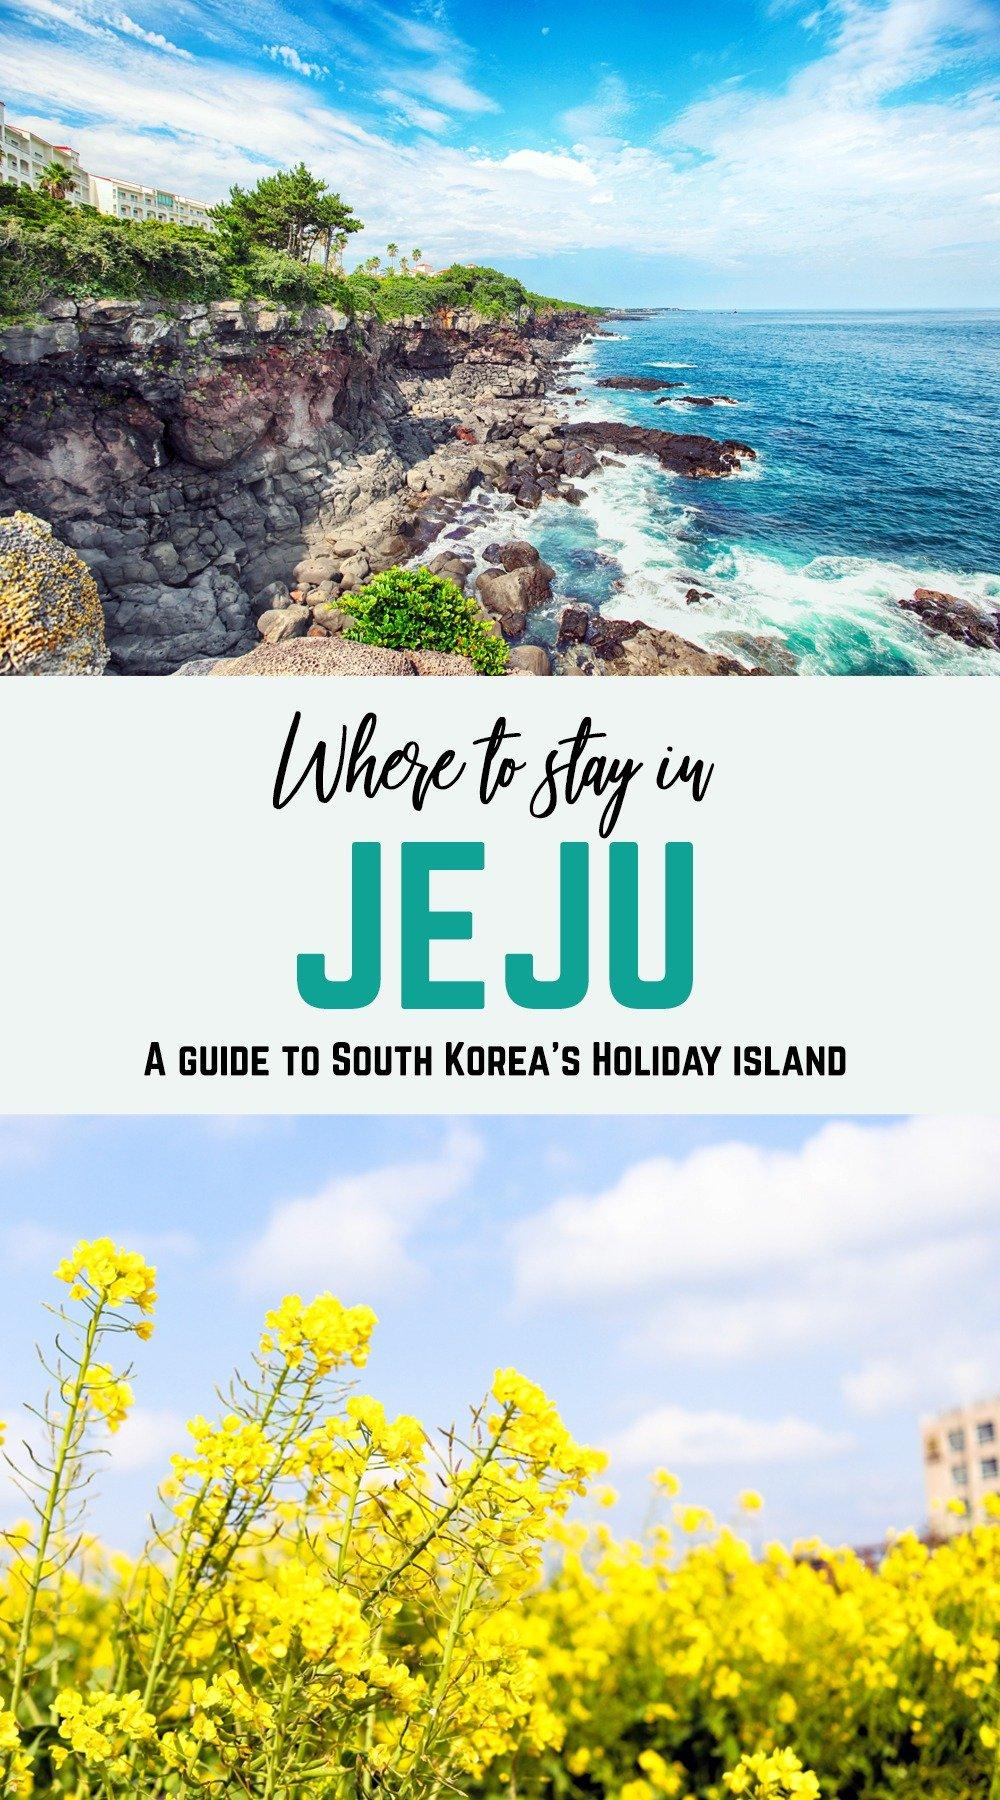 Views like this is what a holiday in Jeju is all about. From beautiful beaches to floral fields to stunning peaks, there’s a lot to see and do in South Korea’s favorite holiday island. Plan your trip quick and easy - here’s where to stay in Jeju.